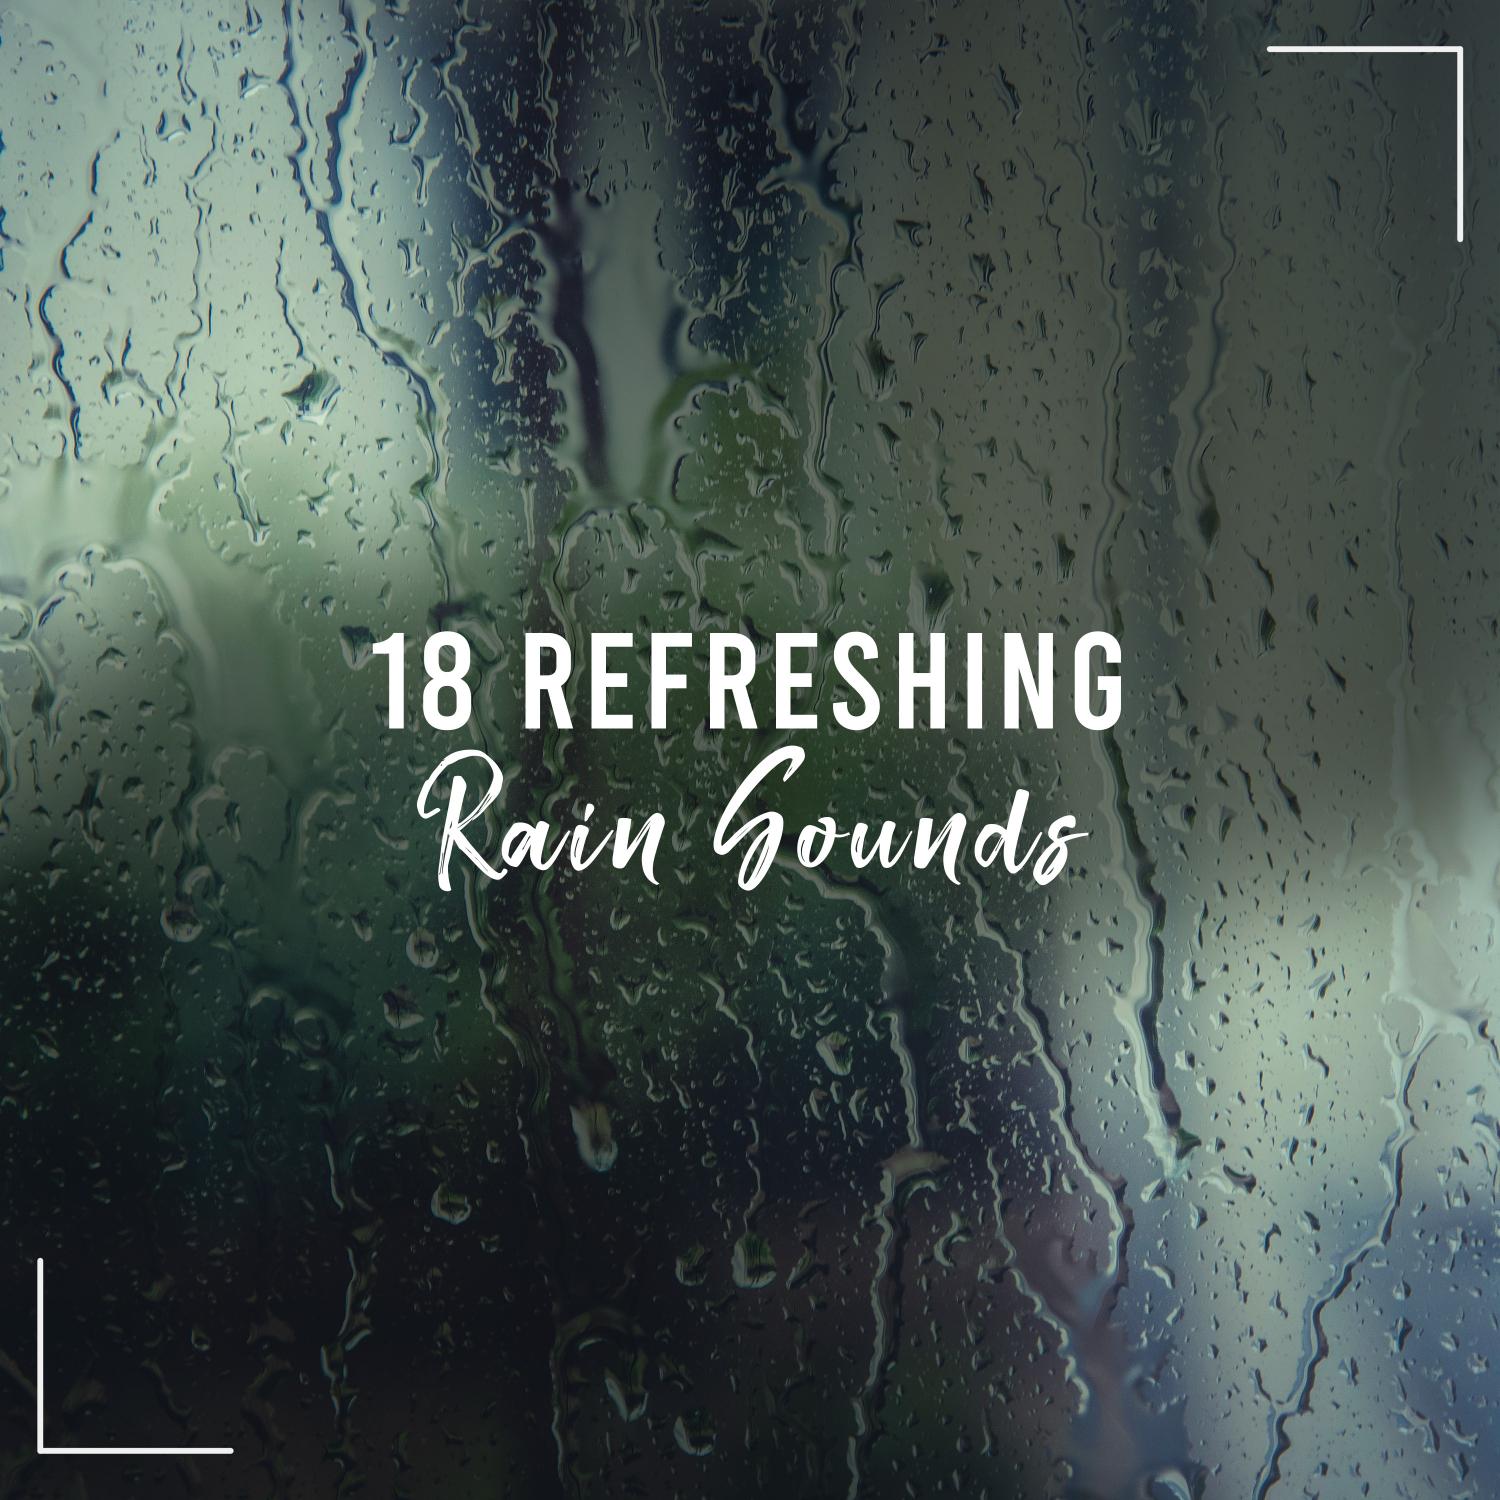 18 Refreshing Rain Sounds - Perfect for Sleeping, Meditating, Yoga, Studying, Relaxing or as White Noise